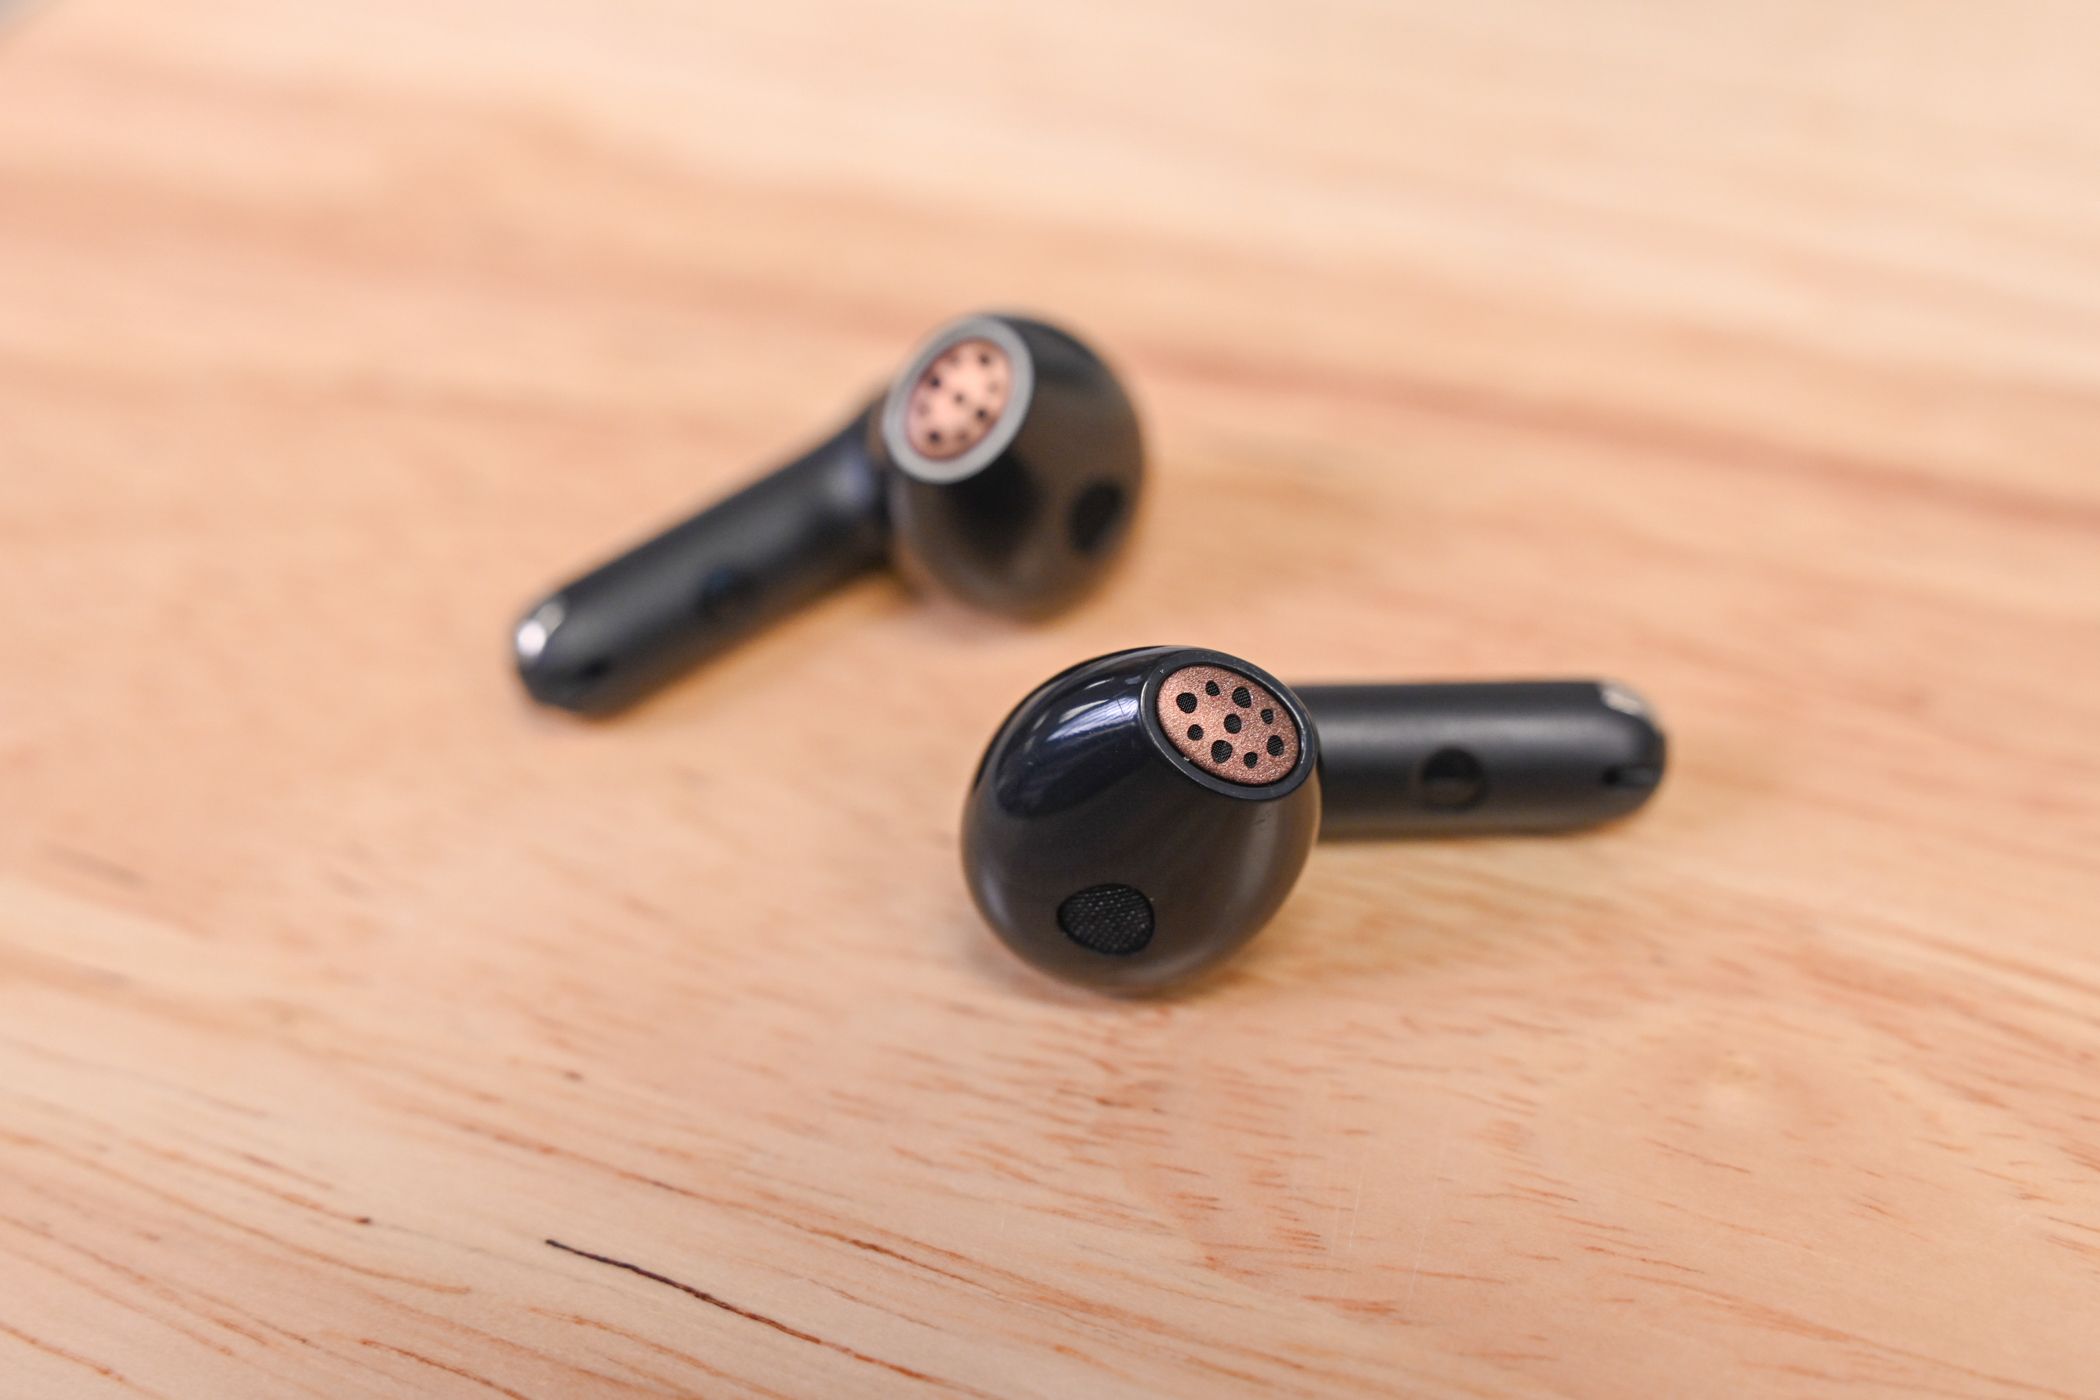 soundpeats-air4-review:-affordable-airpods-alternatives-that-could-be-better